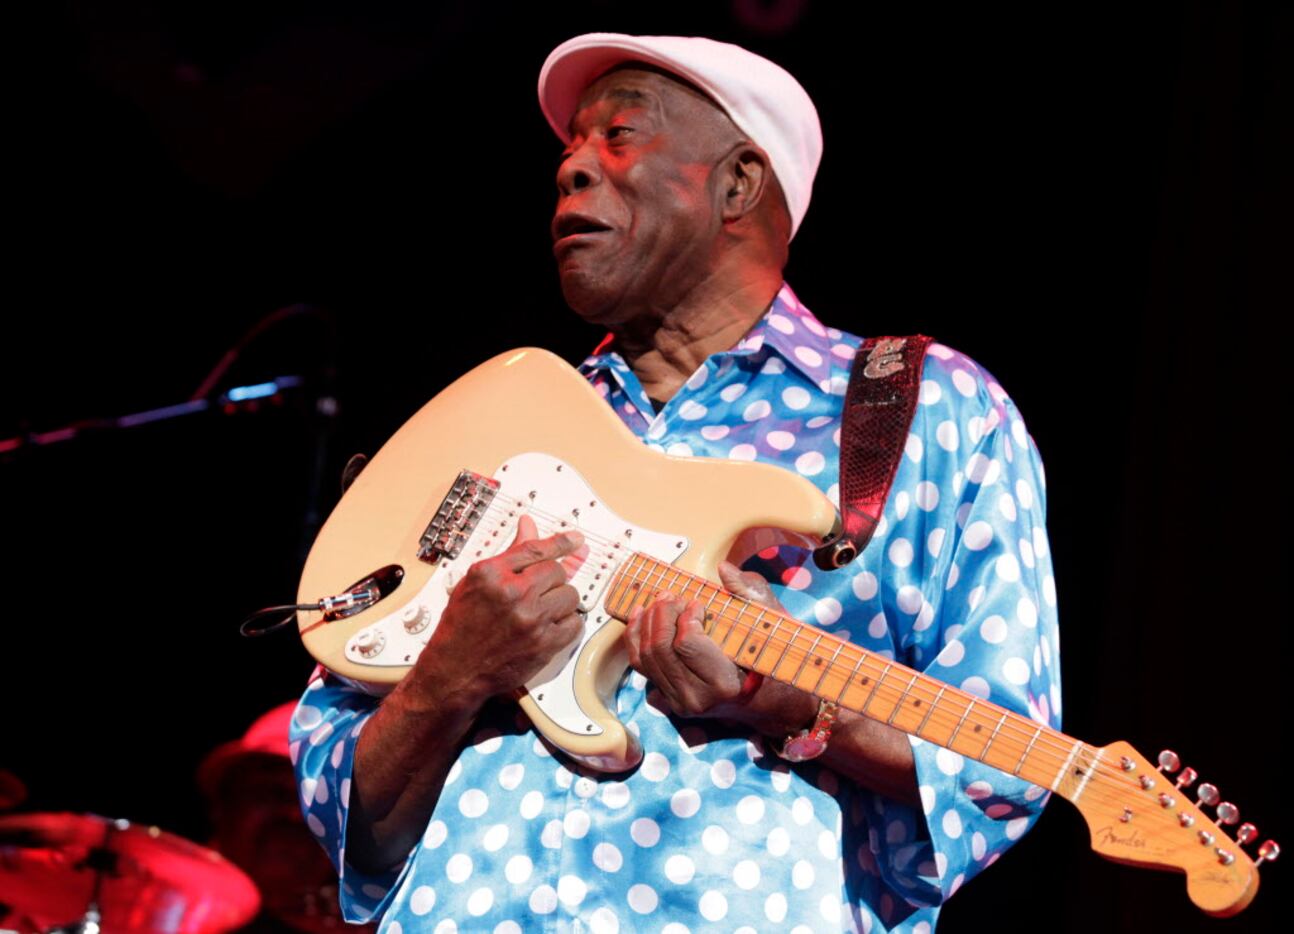 Buddy Guy and his band perform at House of Blues in Dallas, TX, on Mar. 27, 2015.